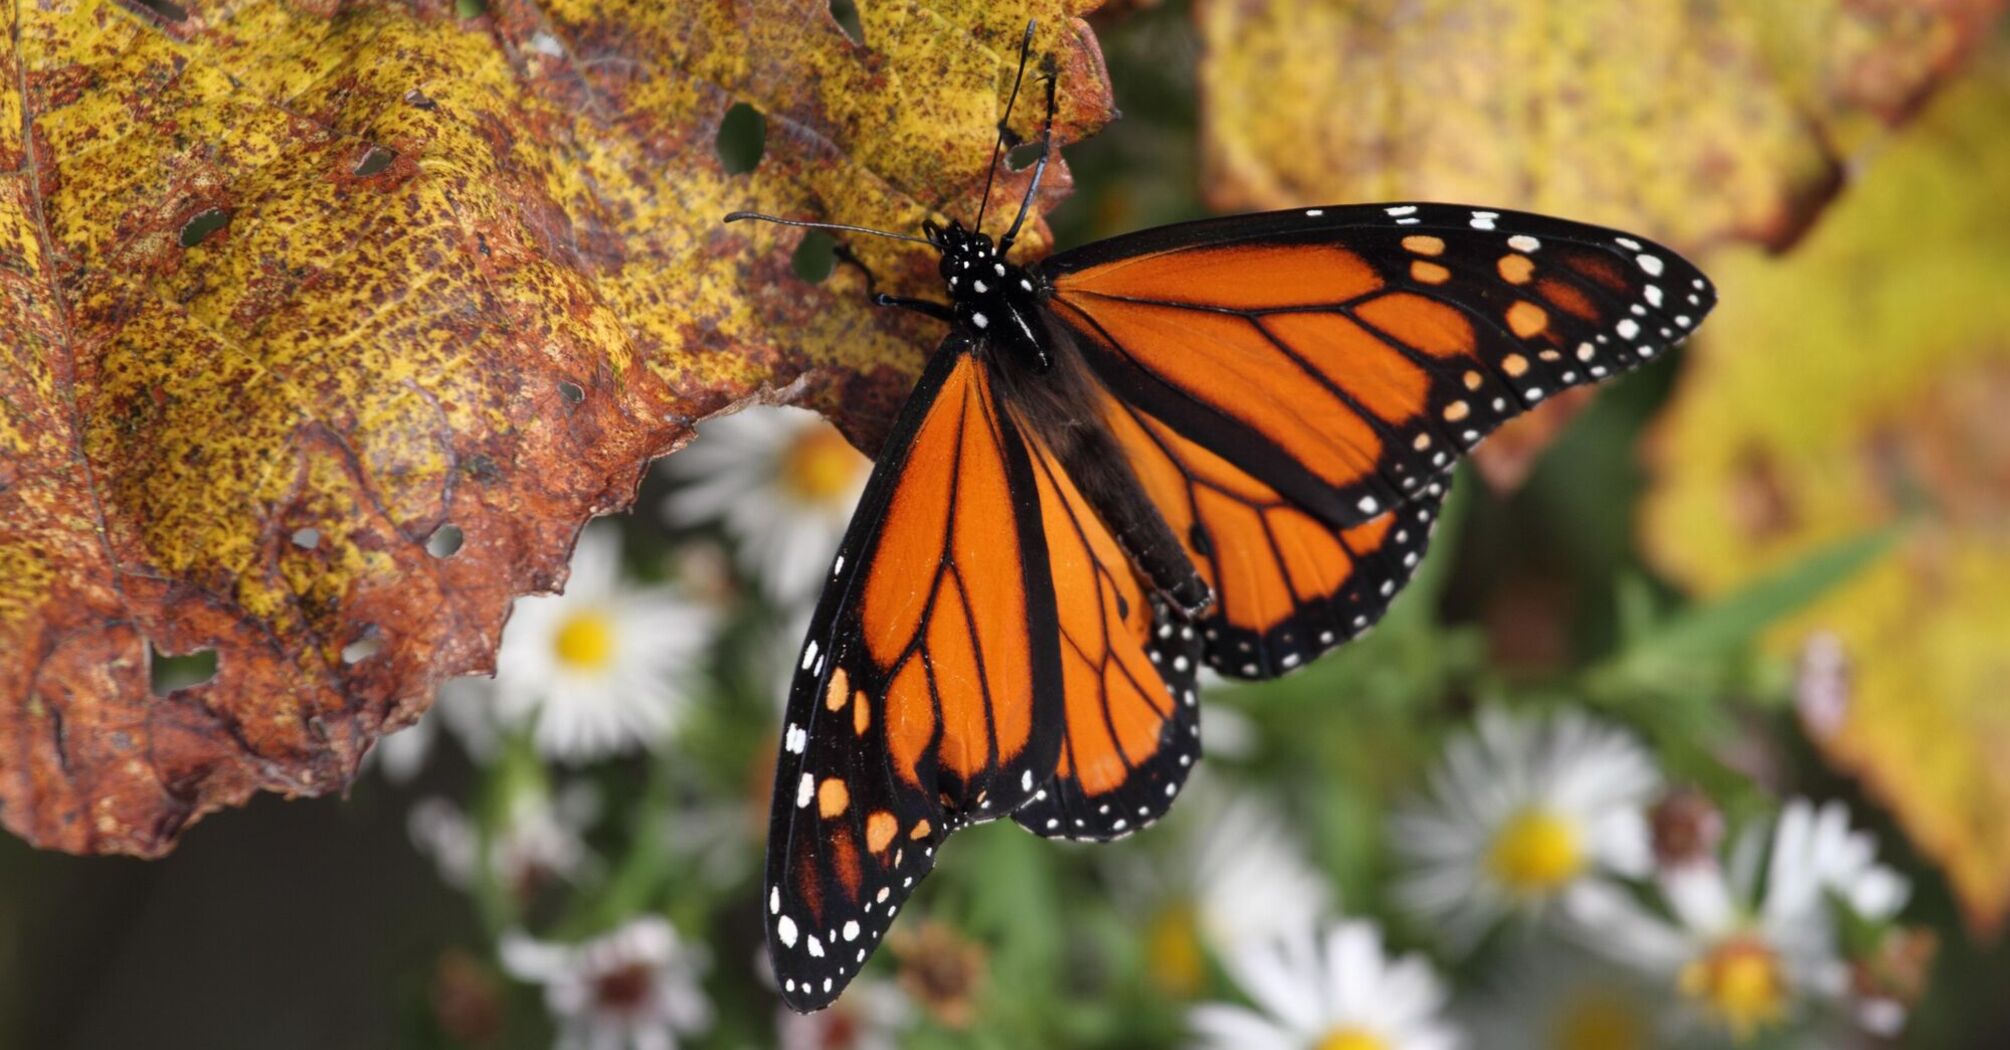 In Mexico, the population of monarch butterflies, which are under threat of extinction, has decreased